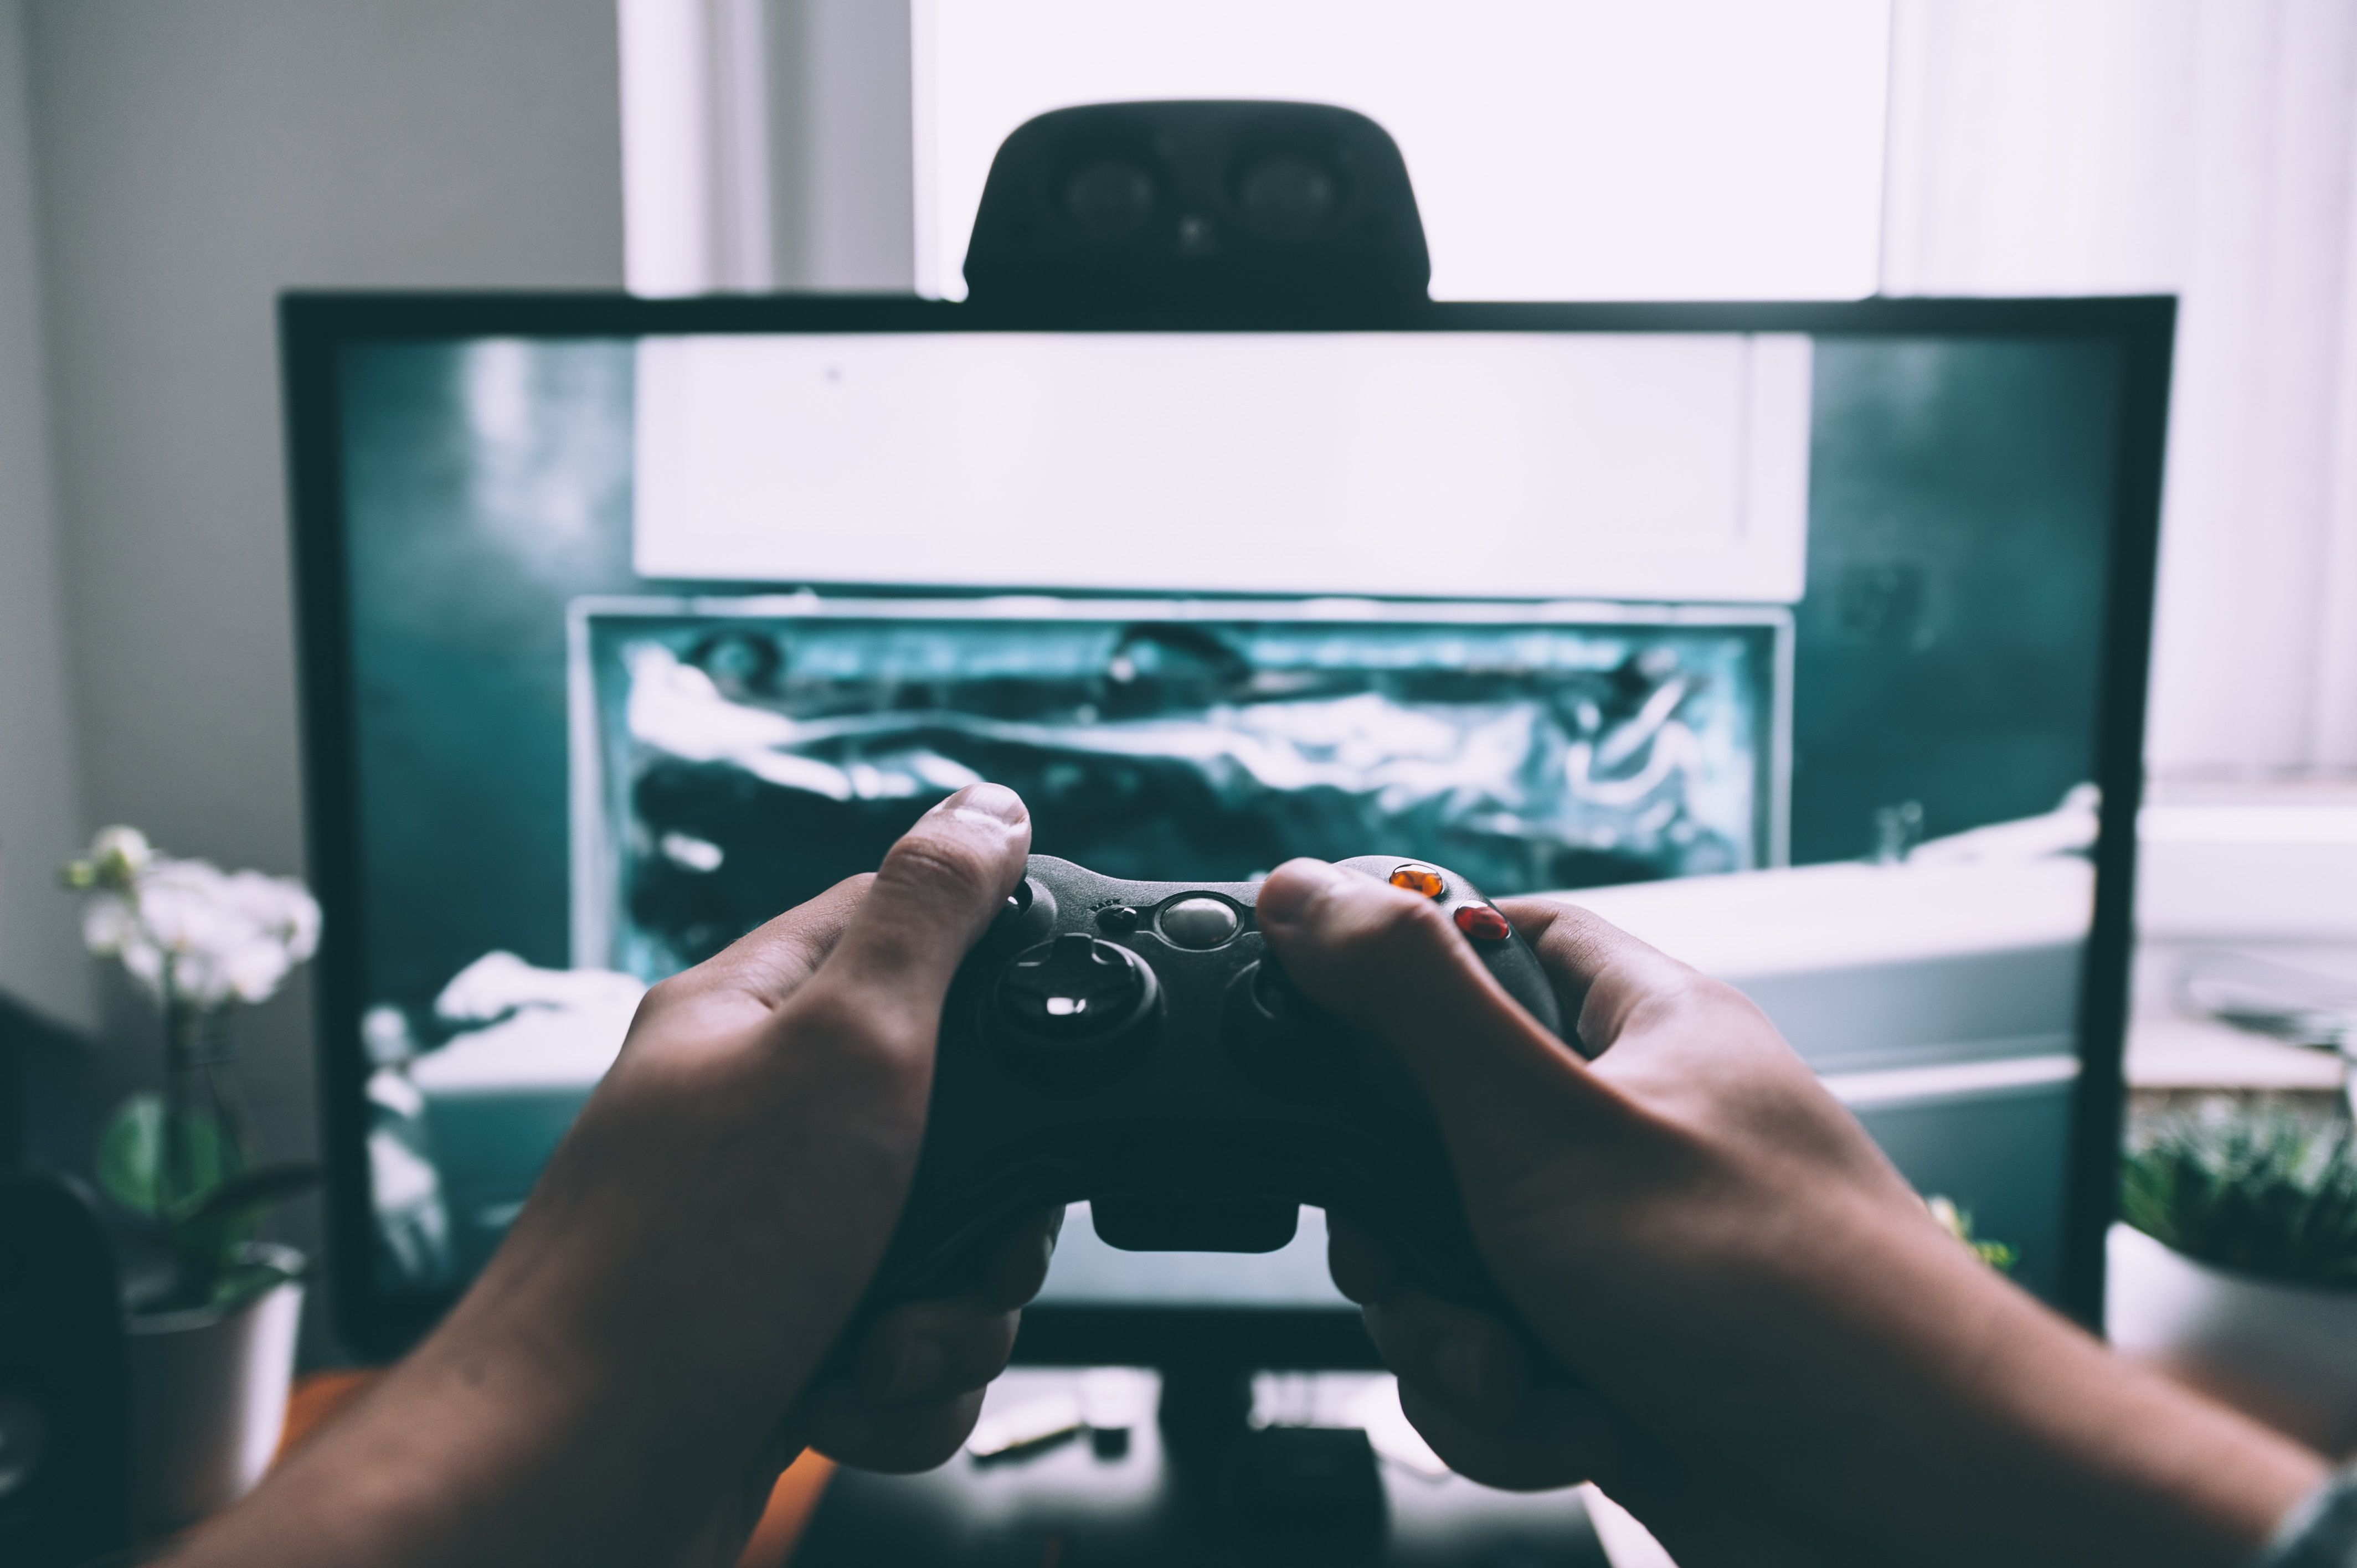 Two hands holding a game controller in front of tv screen.